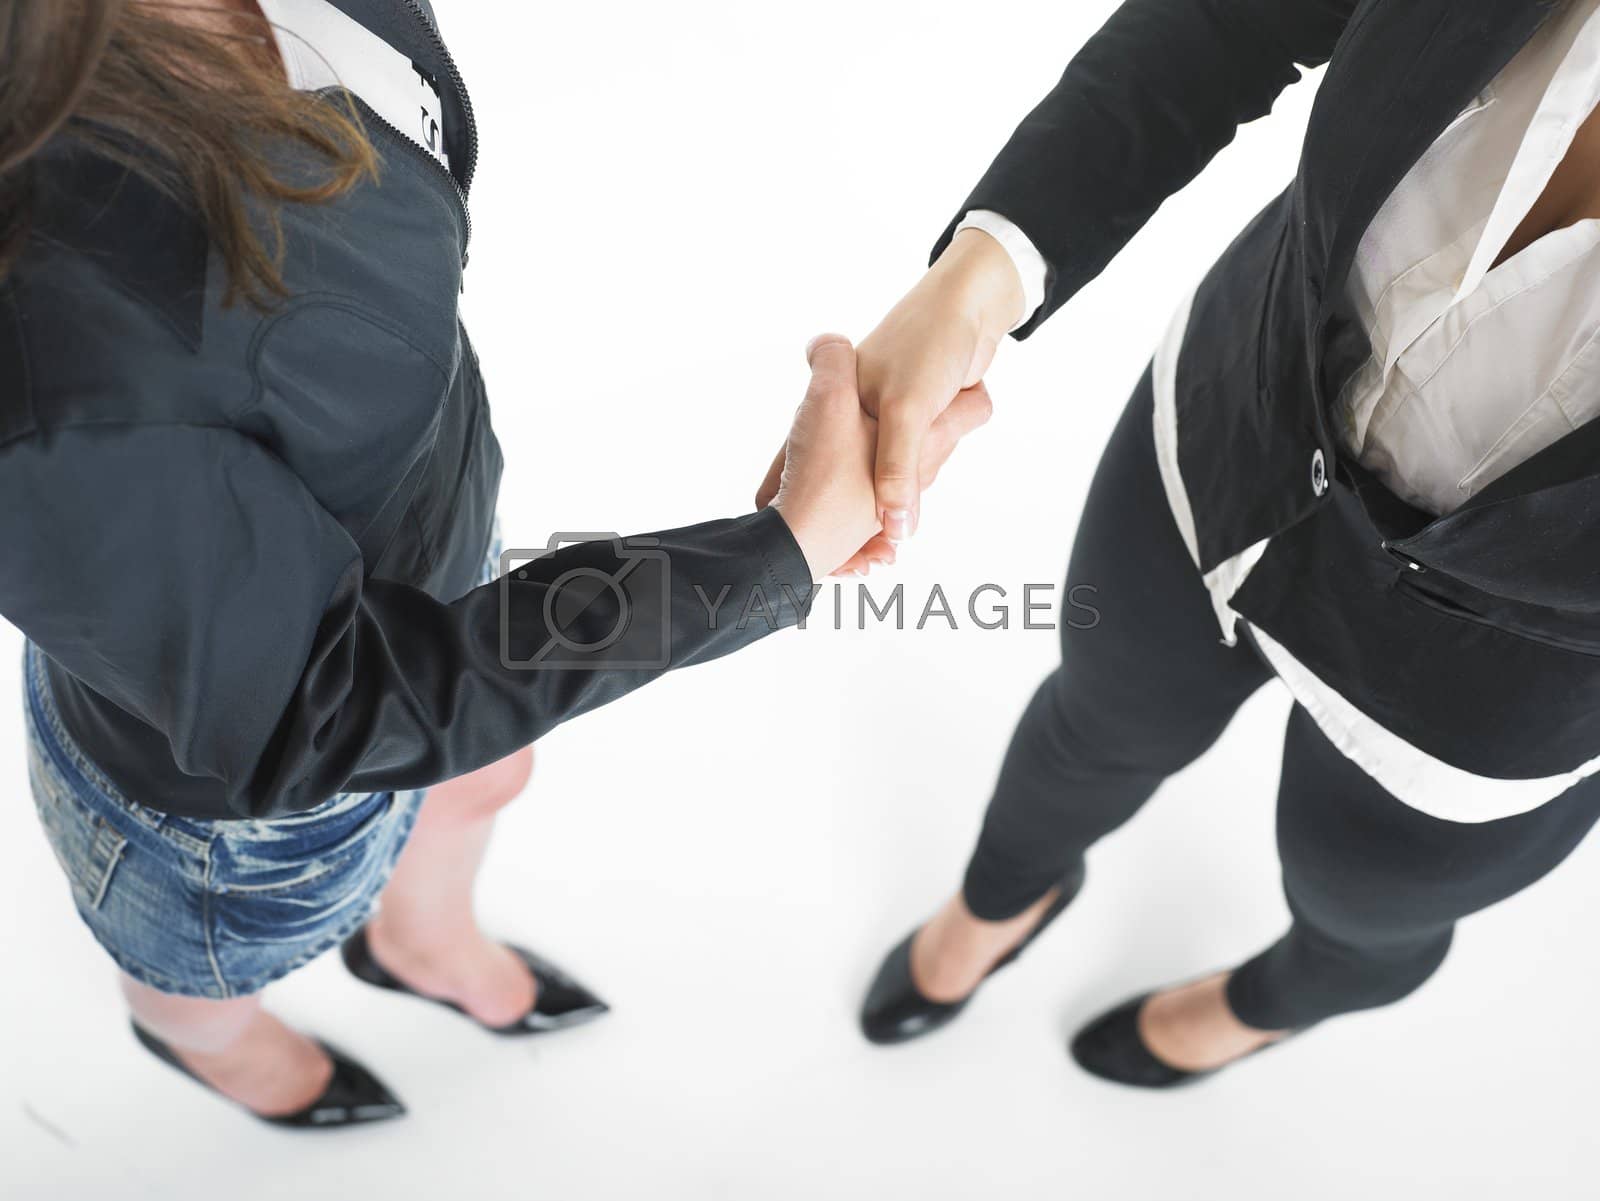 Royalty free image of Handshake Handshaking of two business woman by adamr